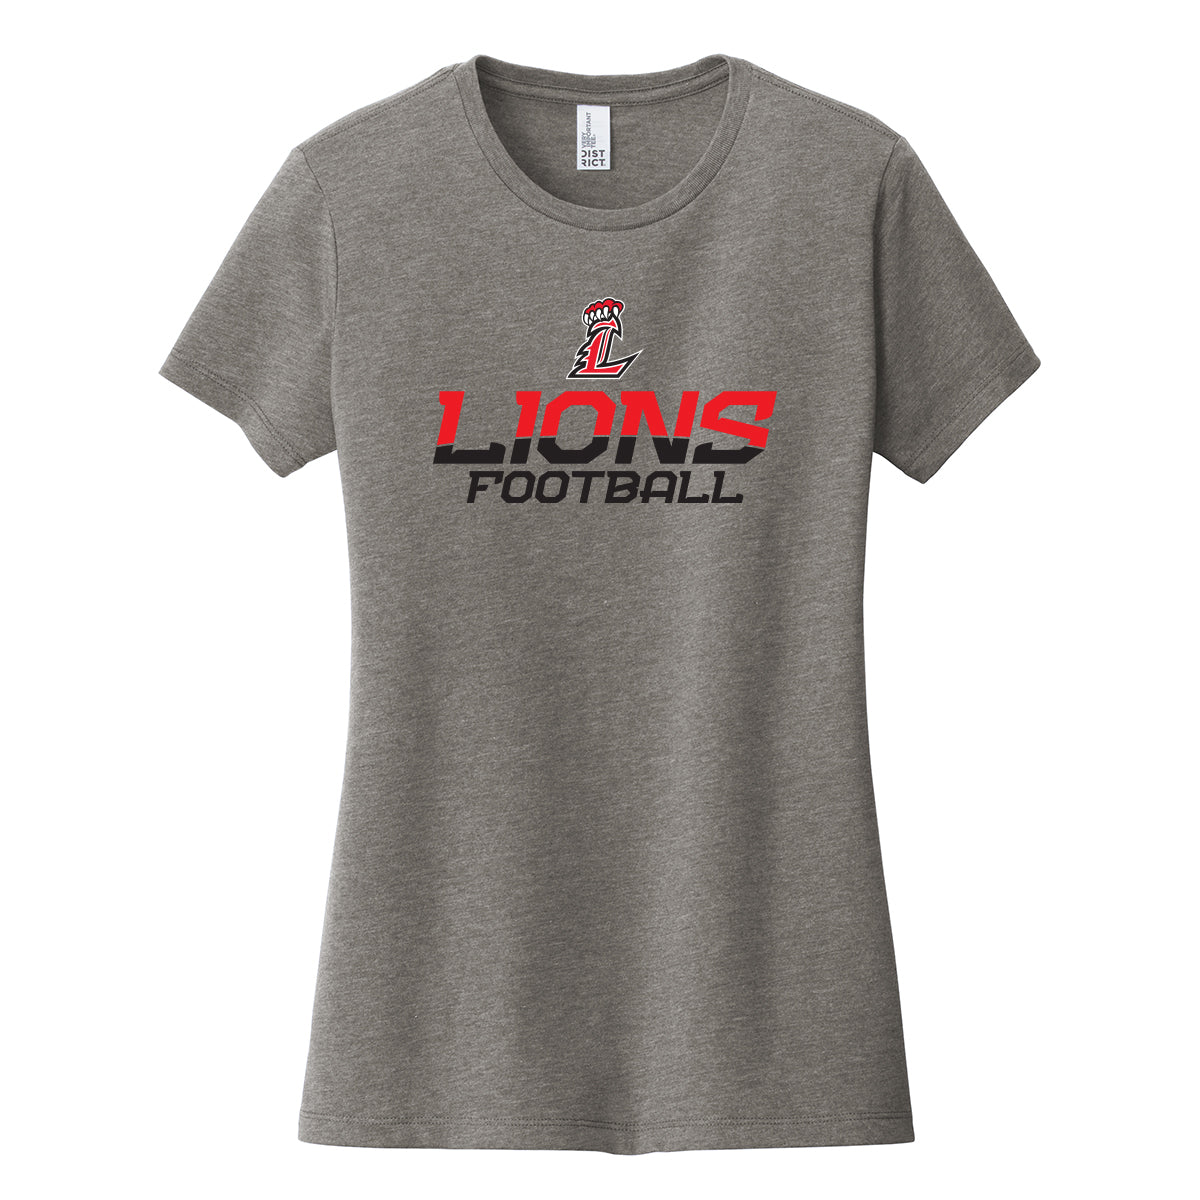 Lions Football (two color) Women's Fitted Tee